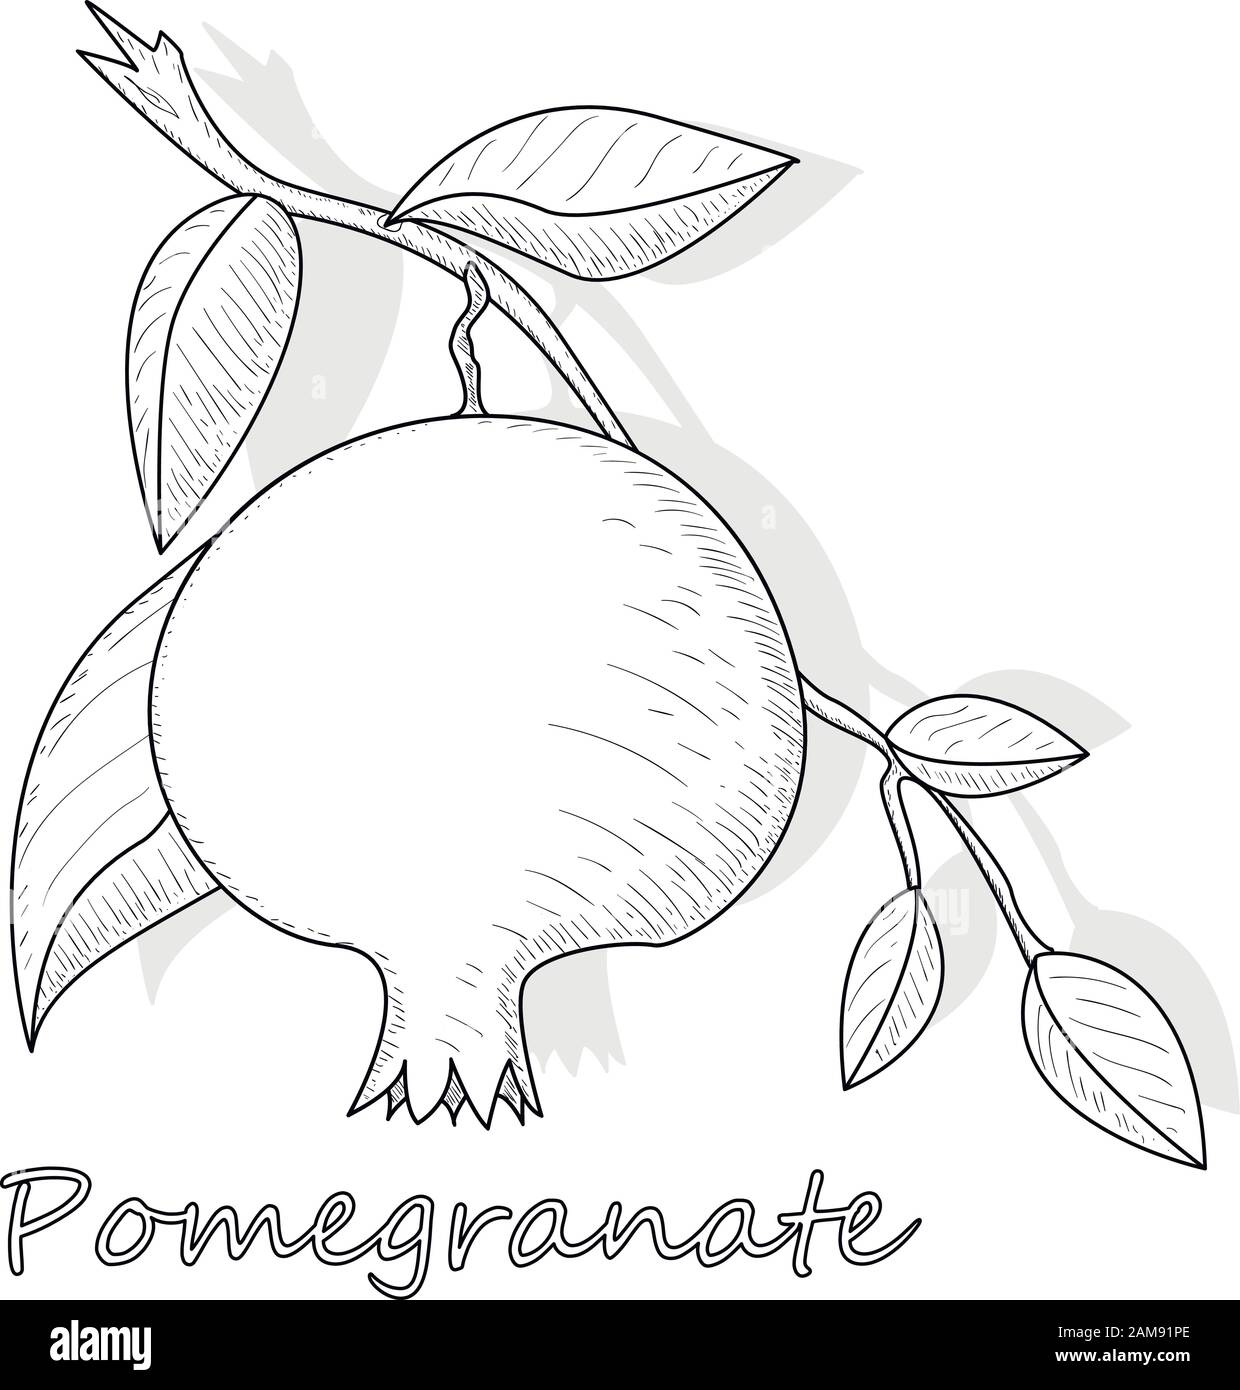 Pomegranate hand drown vector illustration isolated on white background. Monochrome. Stock Vector